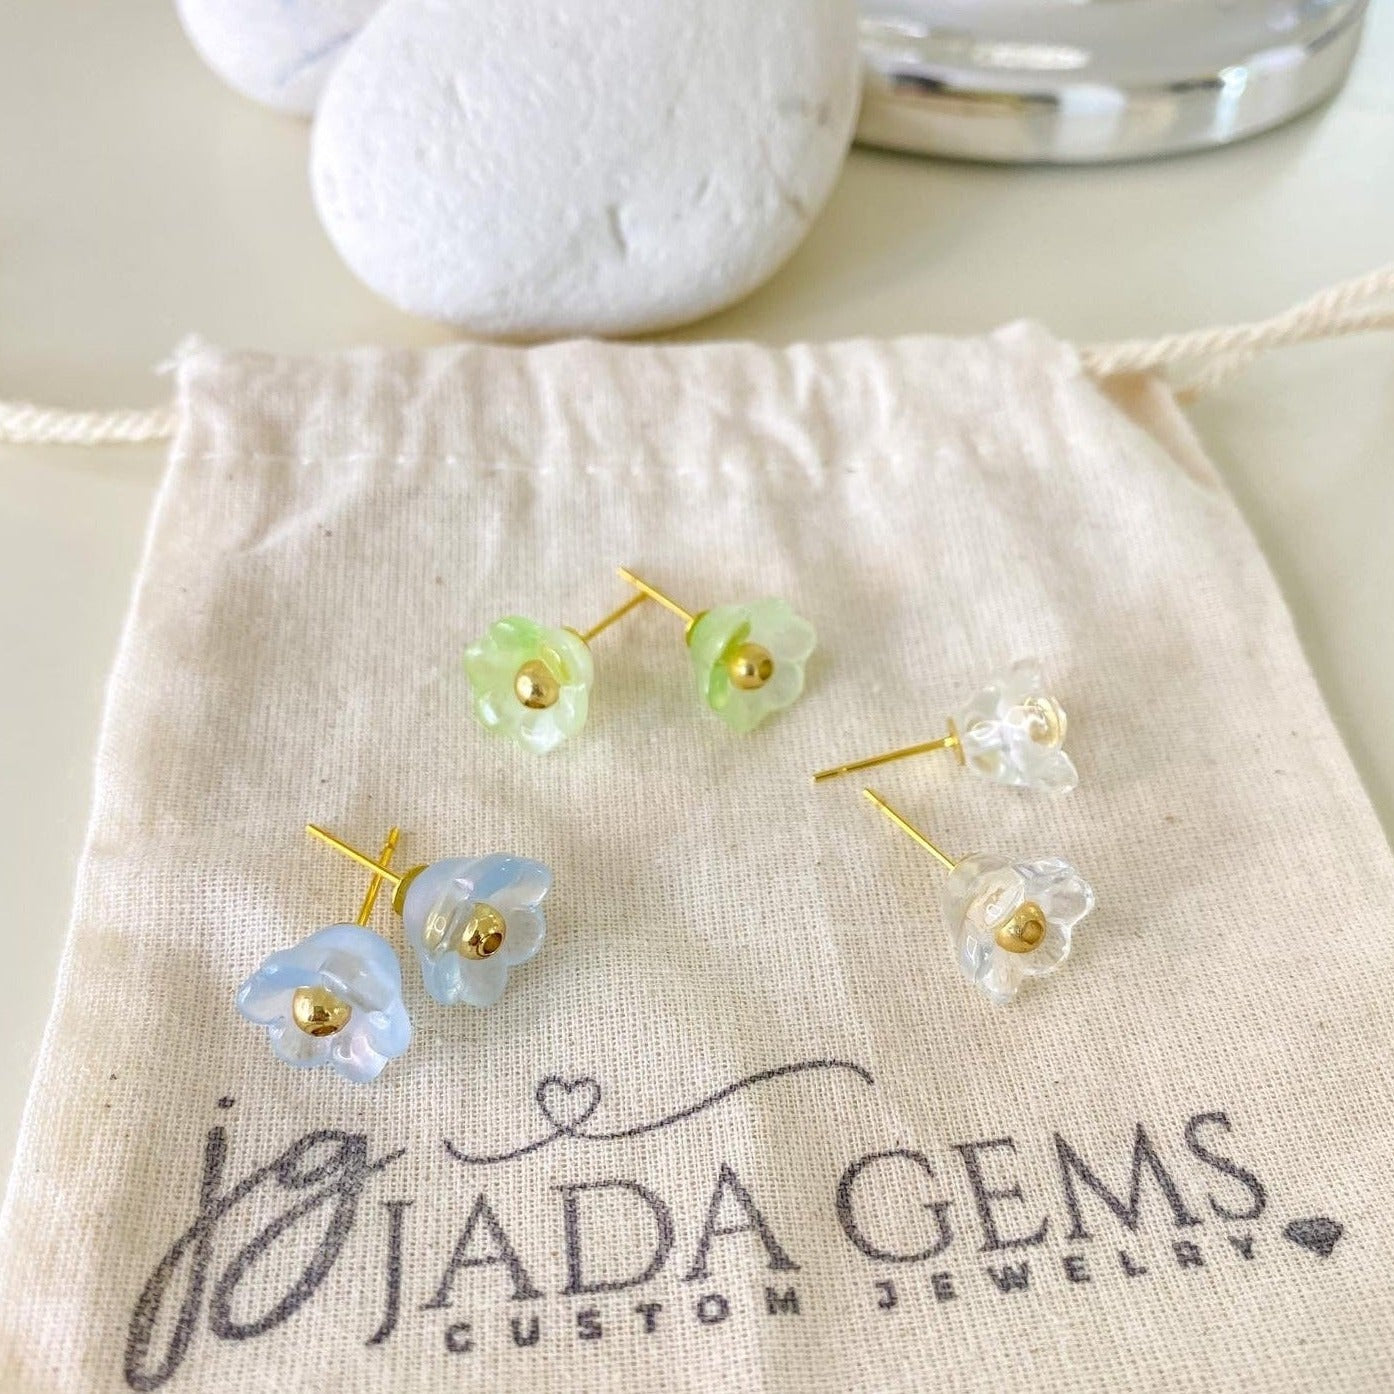 flower stud earrings in green, blue and clear